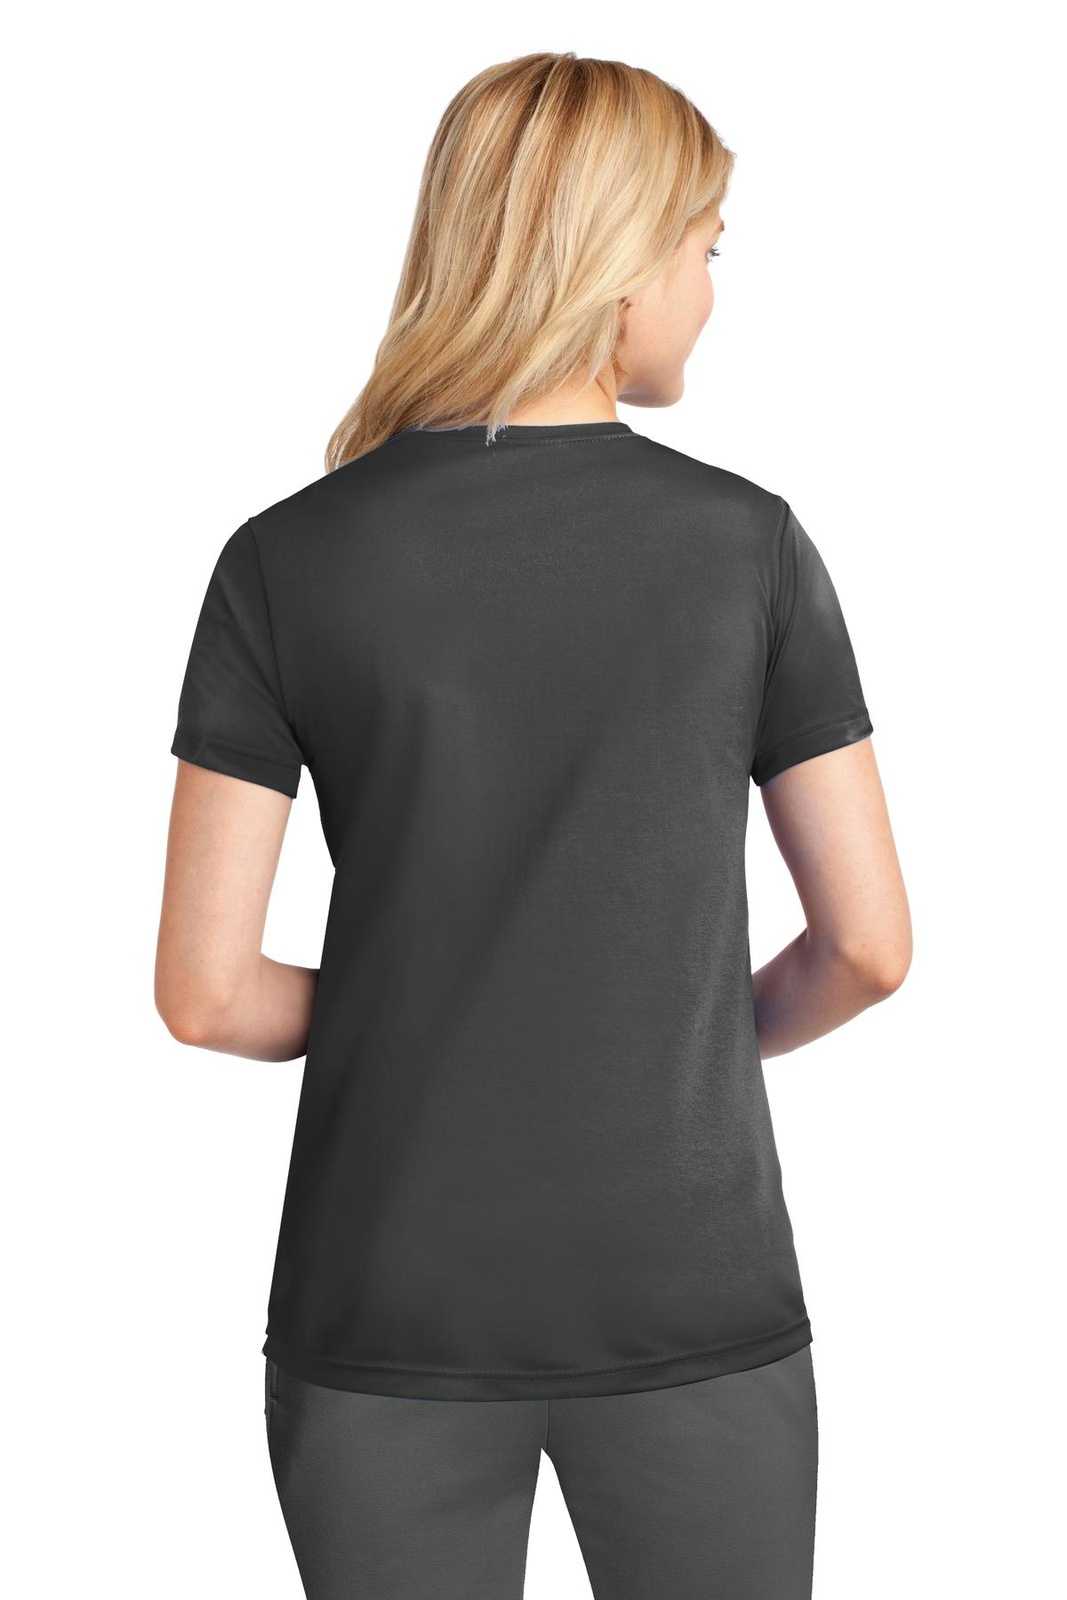 Port & Company LPC380 Ladies Performance Tee - Charcoal - HIT a Double - 1